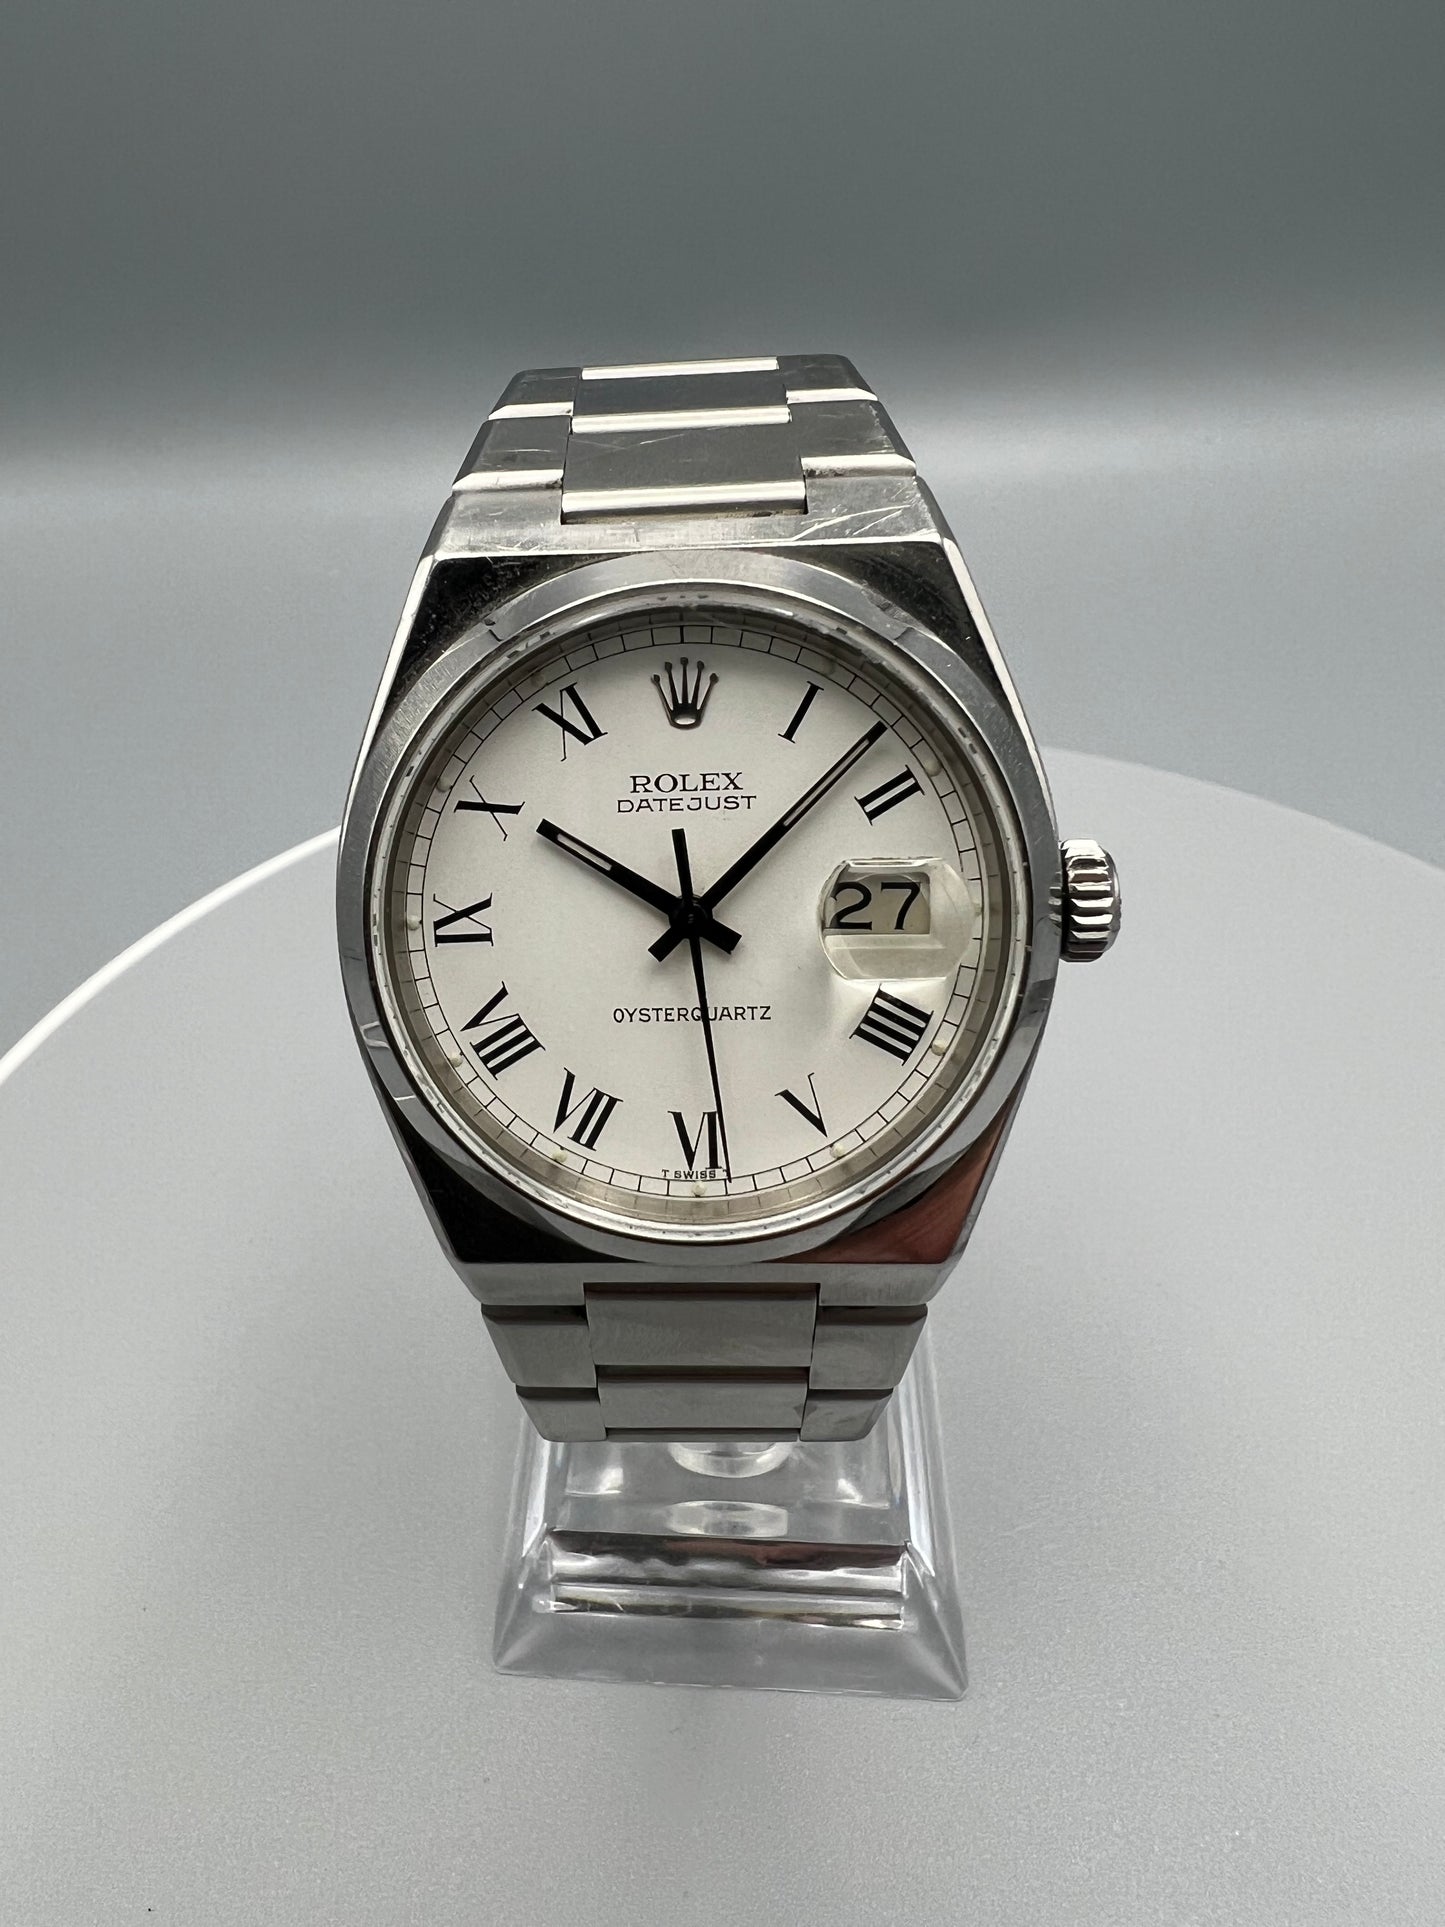 Rolex Ref 17000 Oyster Quartz Date-Just Ref 17000, 1978 Early Buckley Dial, Unpolished, RARE